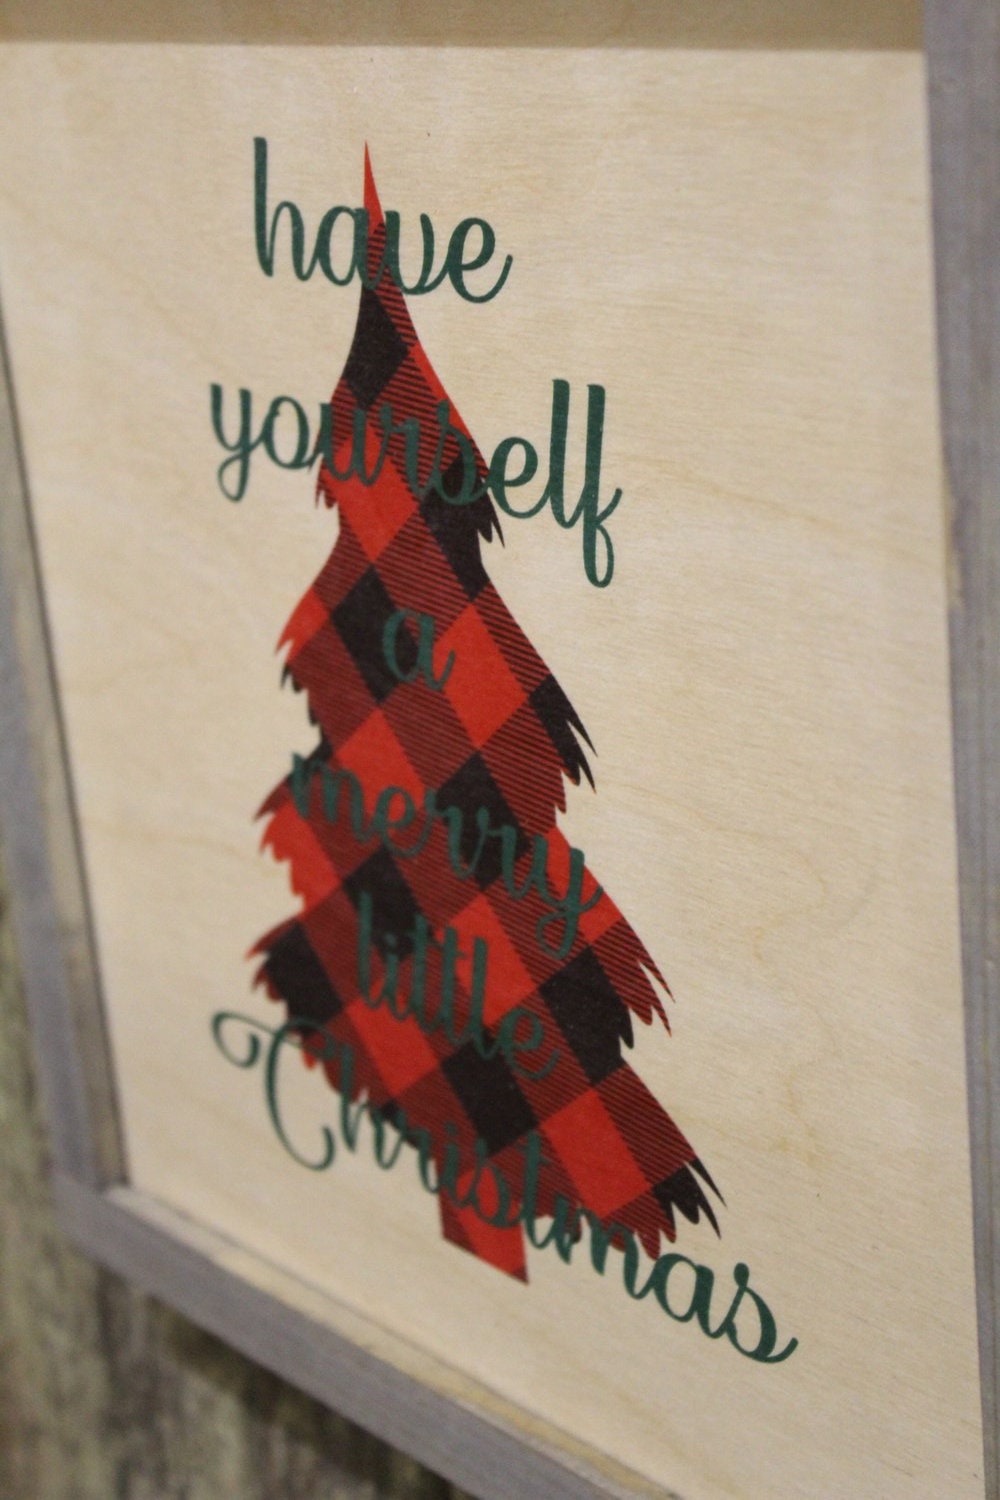 Framed Have Yourself A Merry Little Christmas Wood Sign Plaid Tree Shaped Christmas Décor Print Wall Art Decoration Wall Hanging Lyrics Text